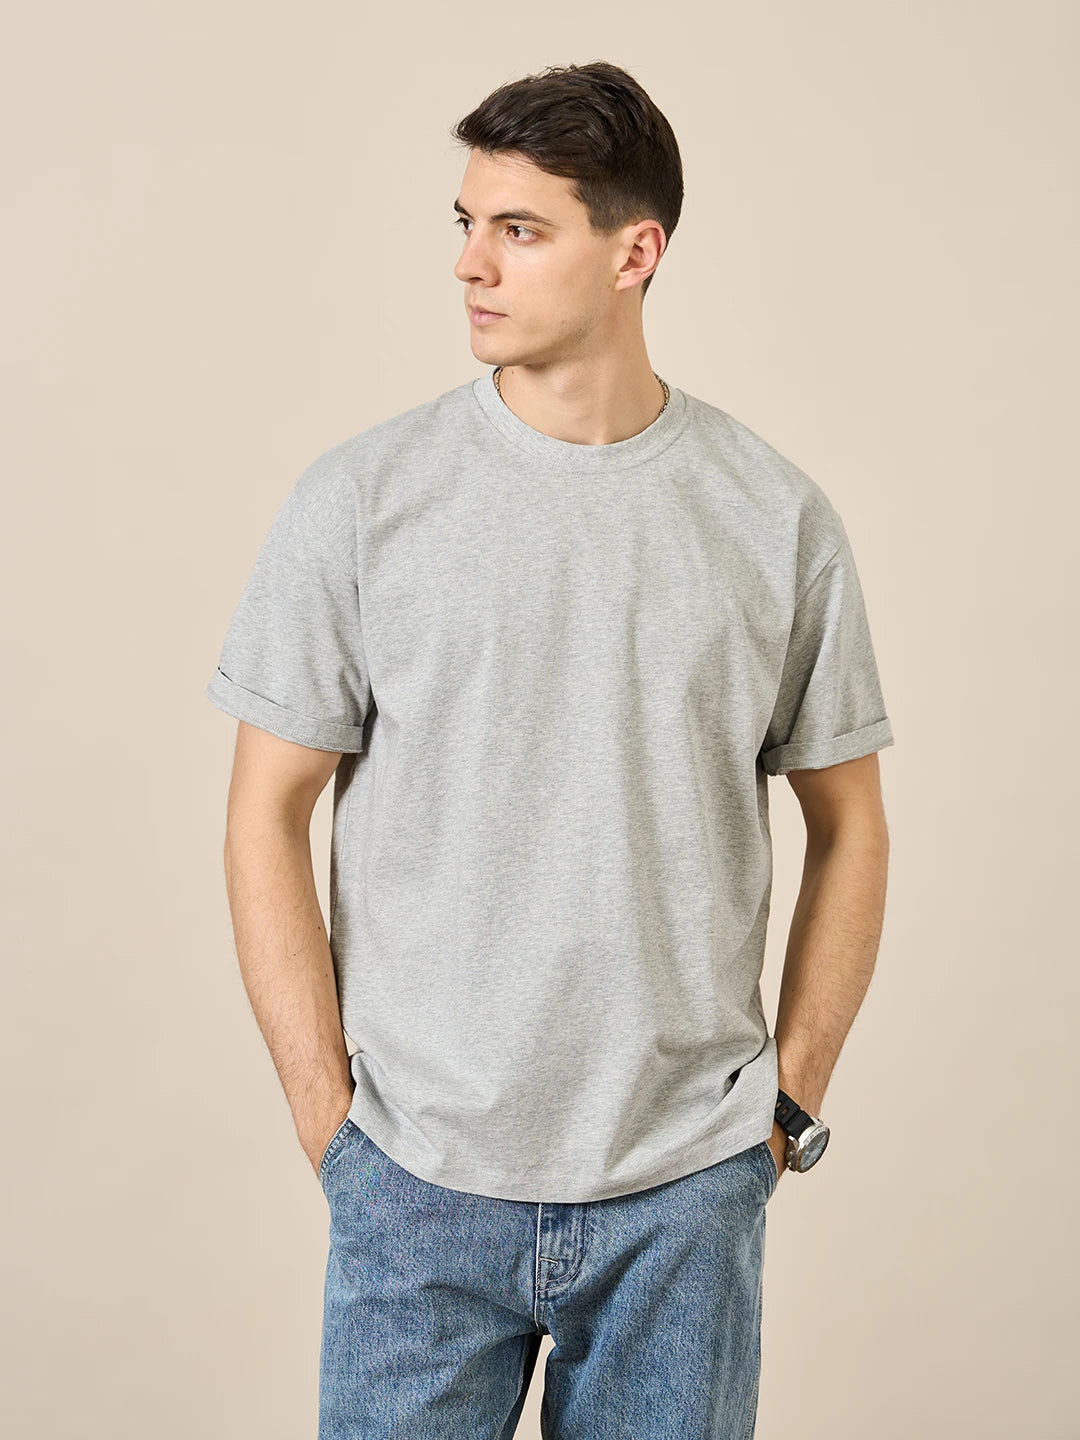 T-shirt Men High Quality Solid Color Drop Sleeve Loose